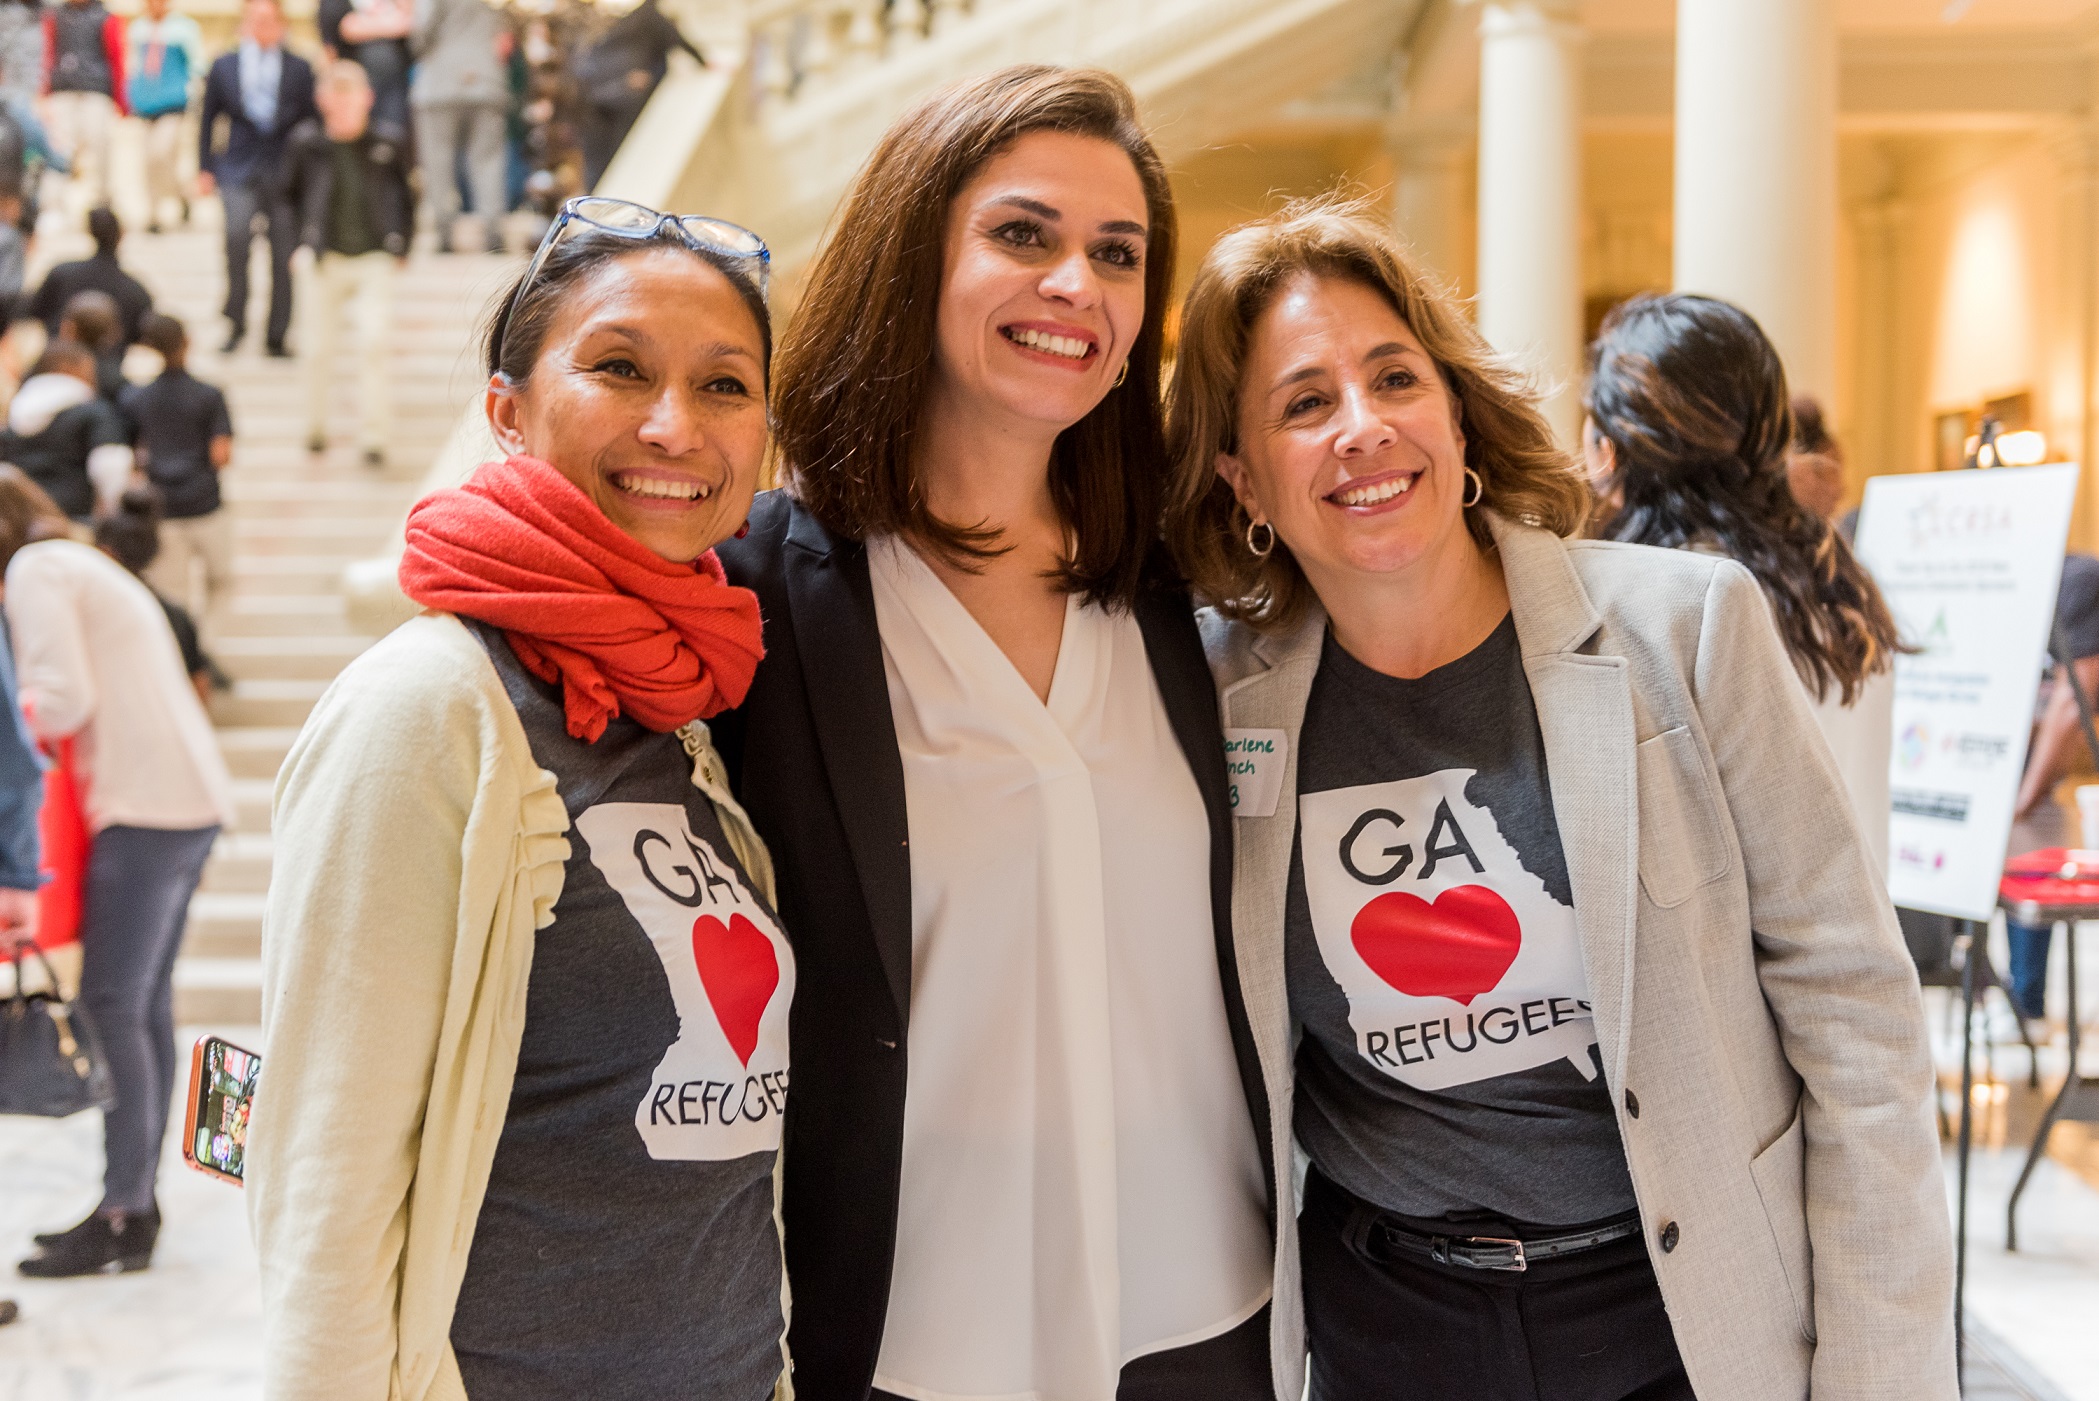 Three women wearing GA Loves Refugees t-shirts smile together at the Georgia State Capitol.